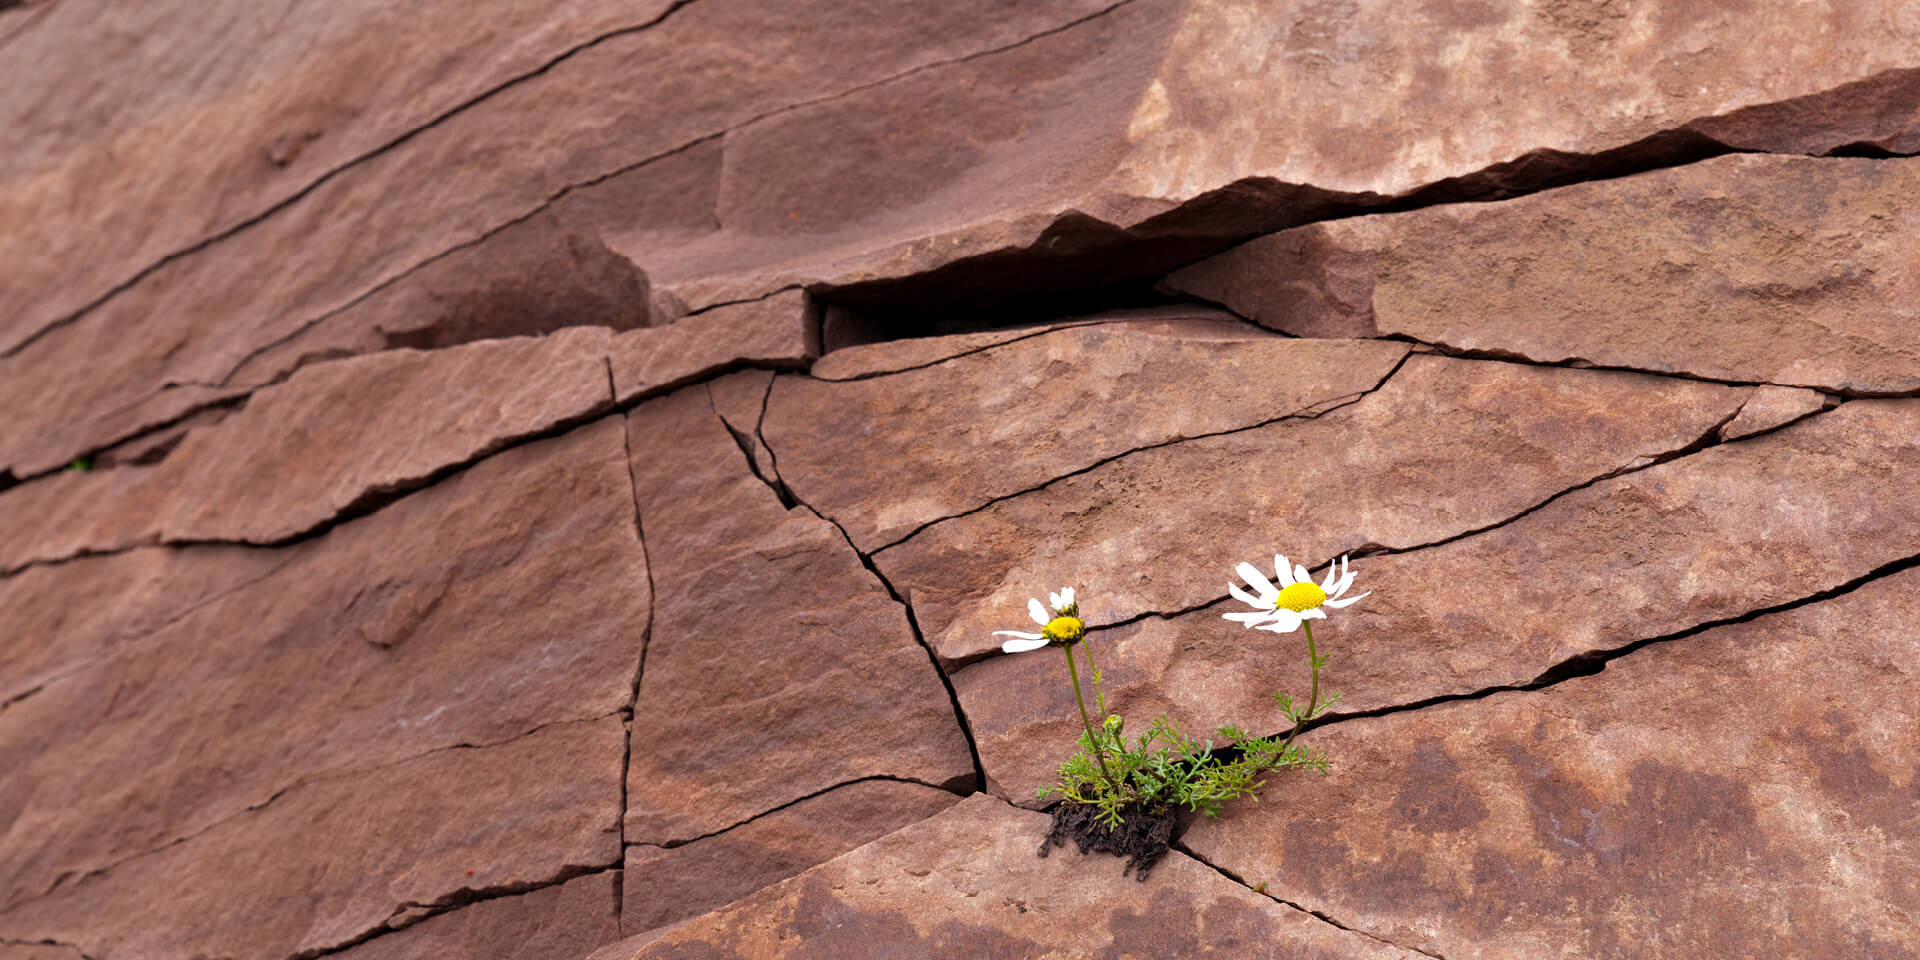 Rock with rock fault and single flower